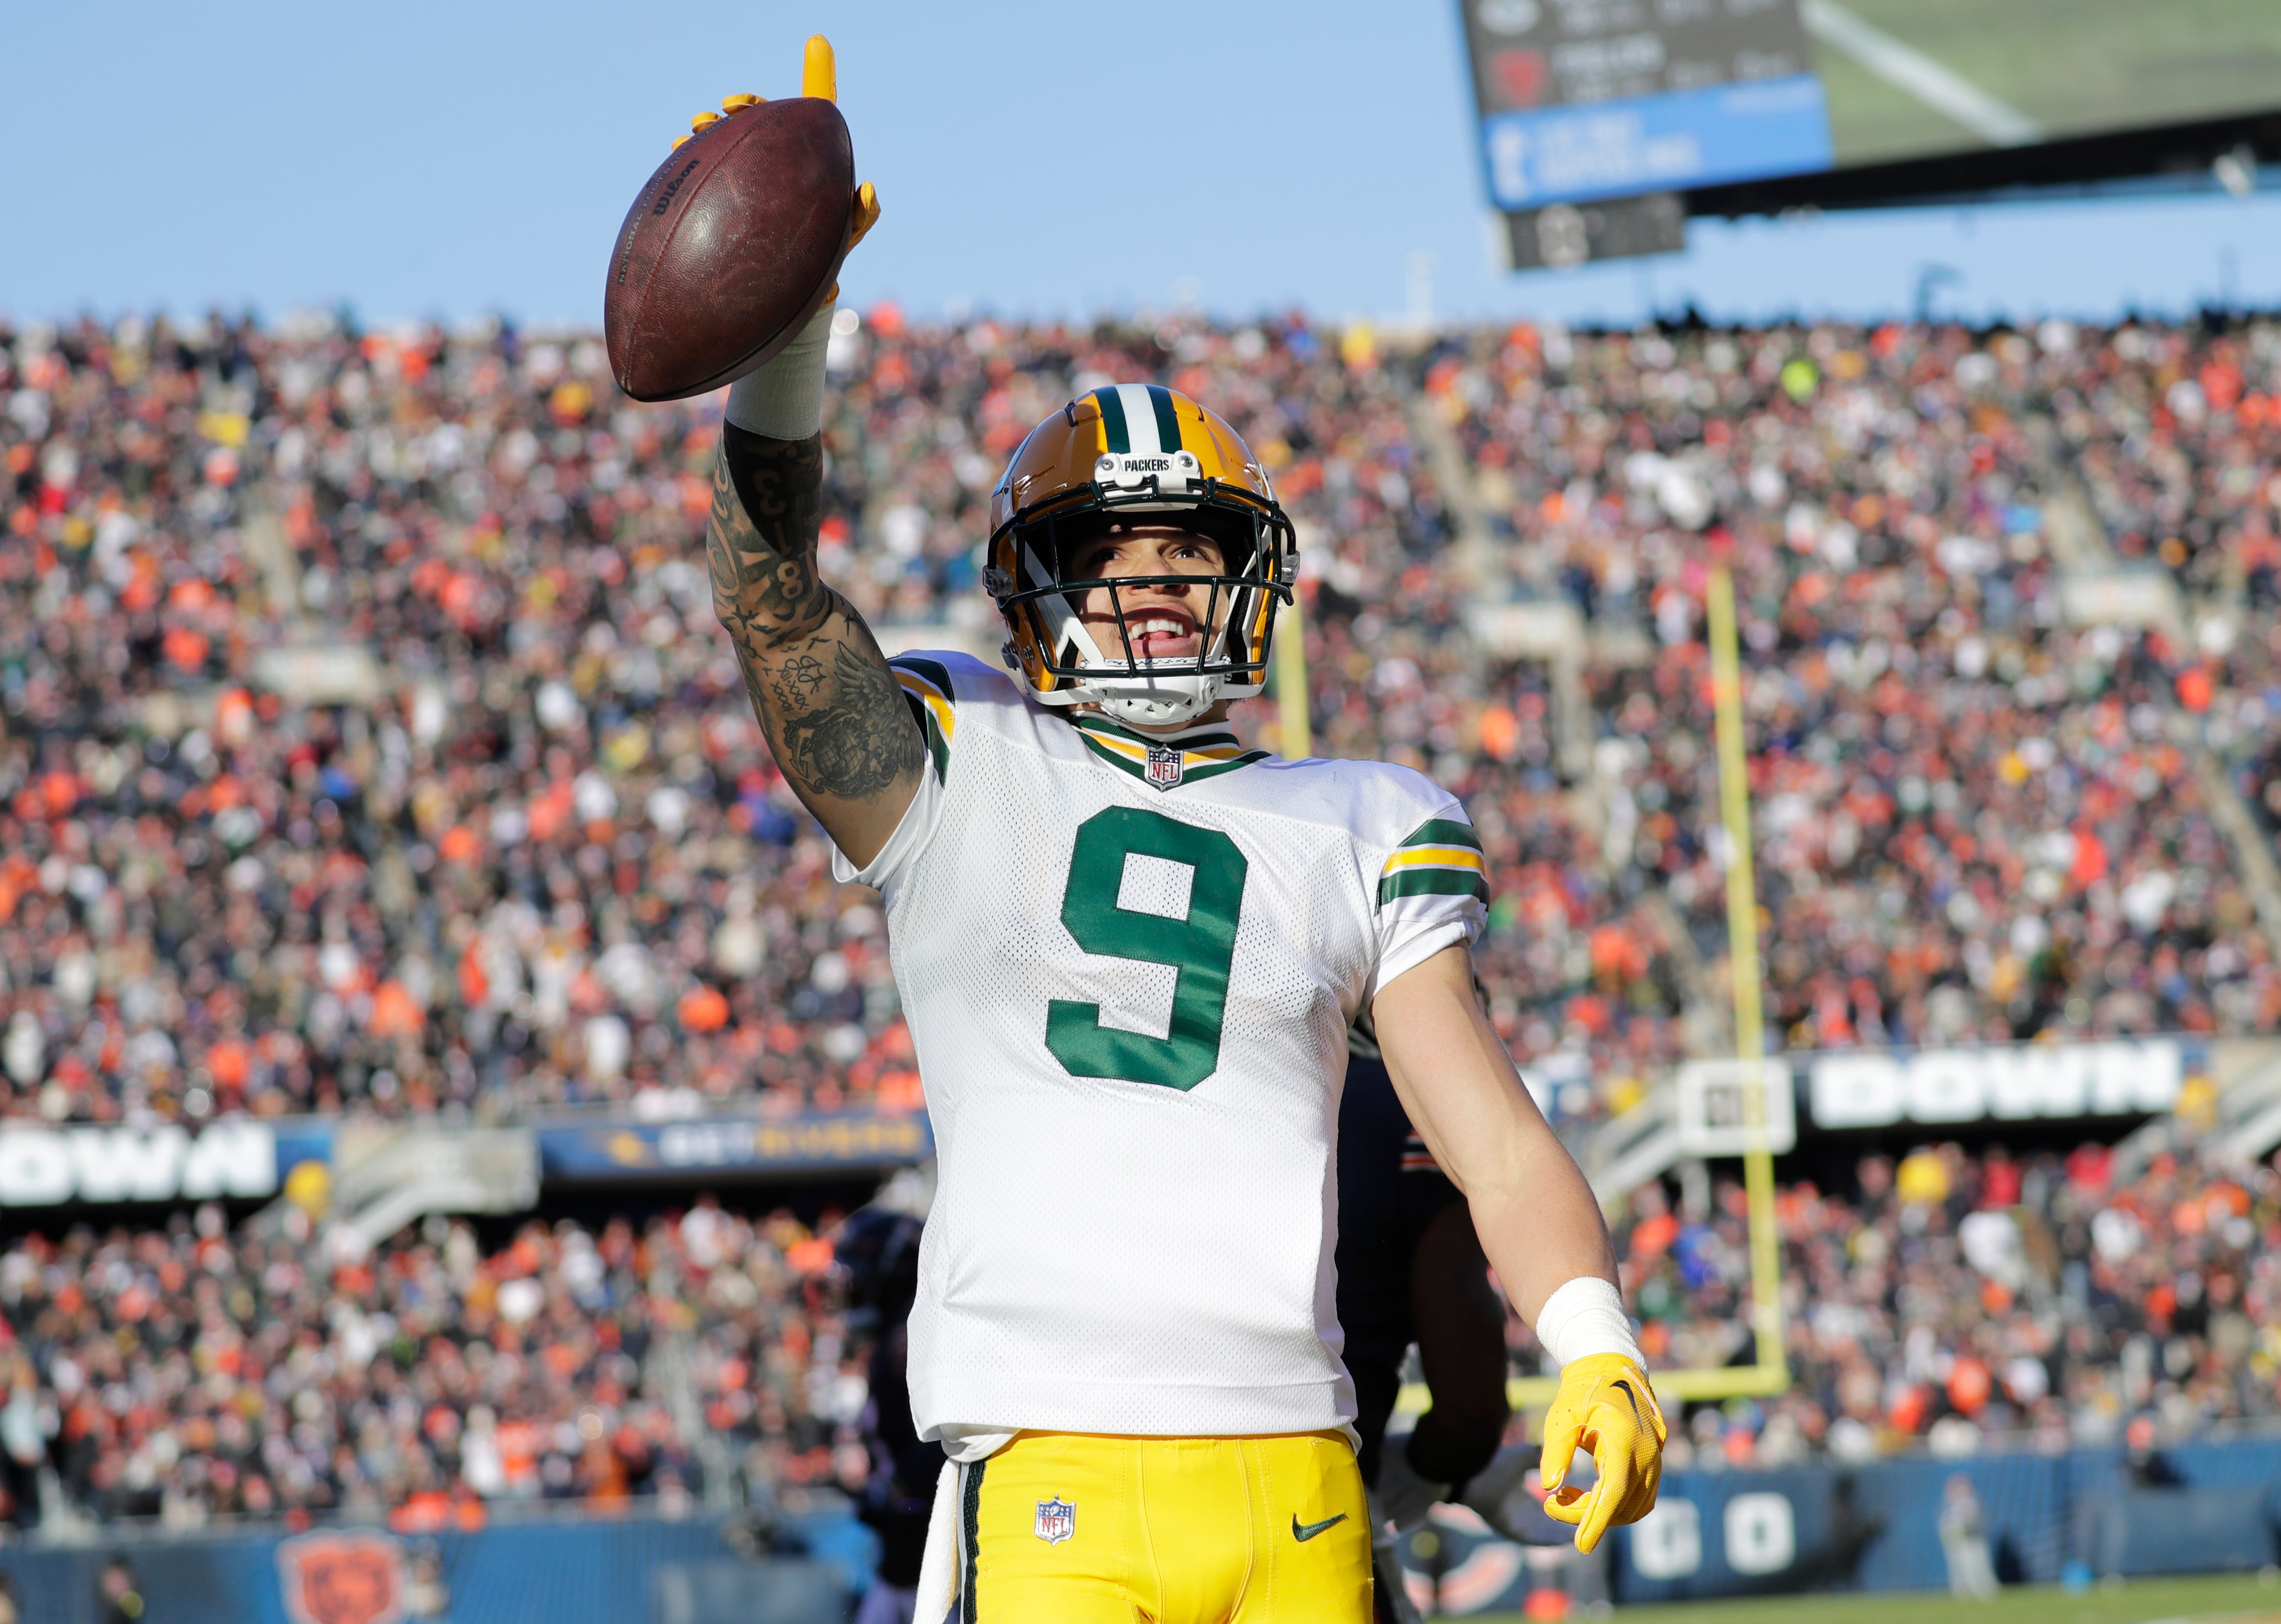 Green Bay Packers come from behind to beat Chicago Bears for the eighth straight time